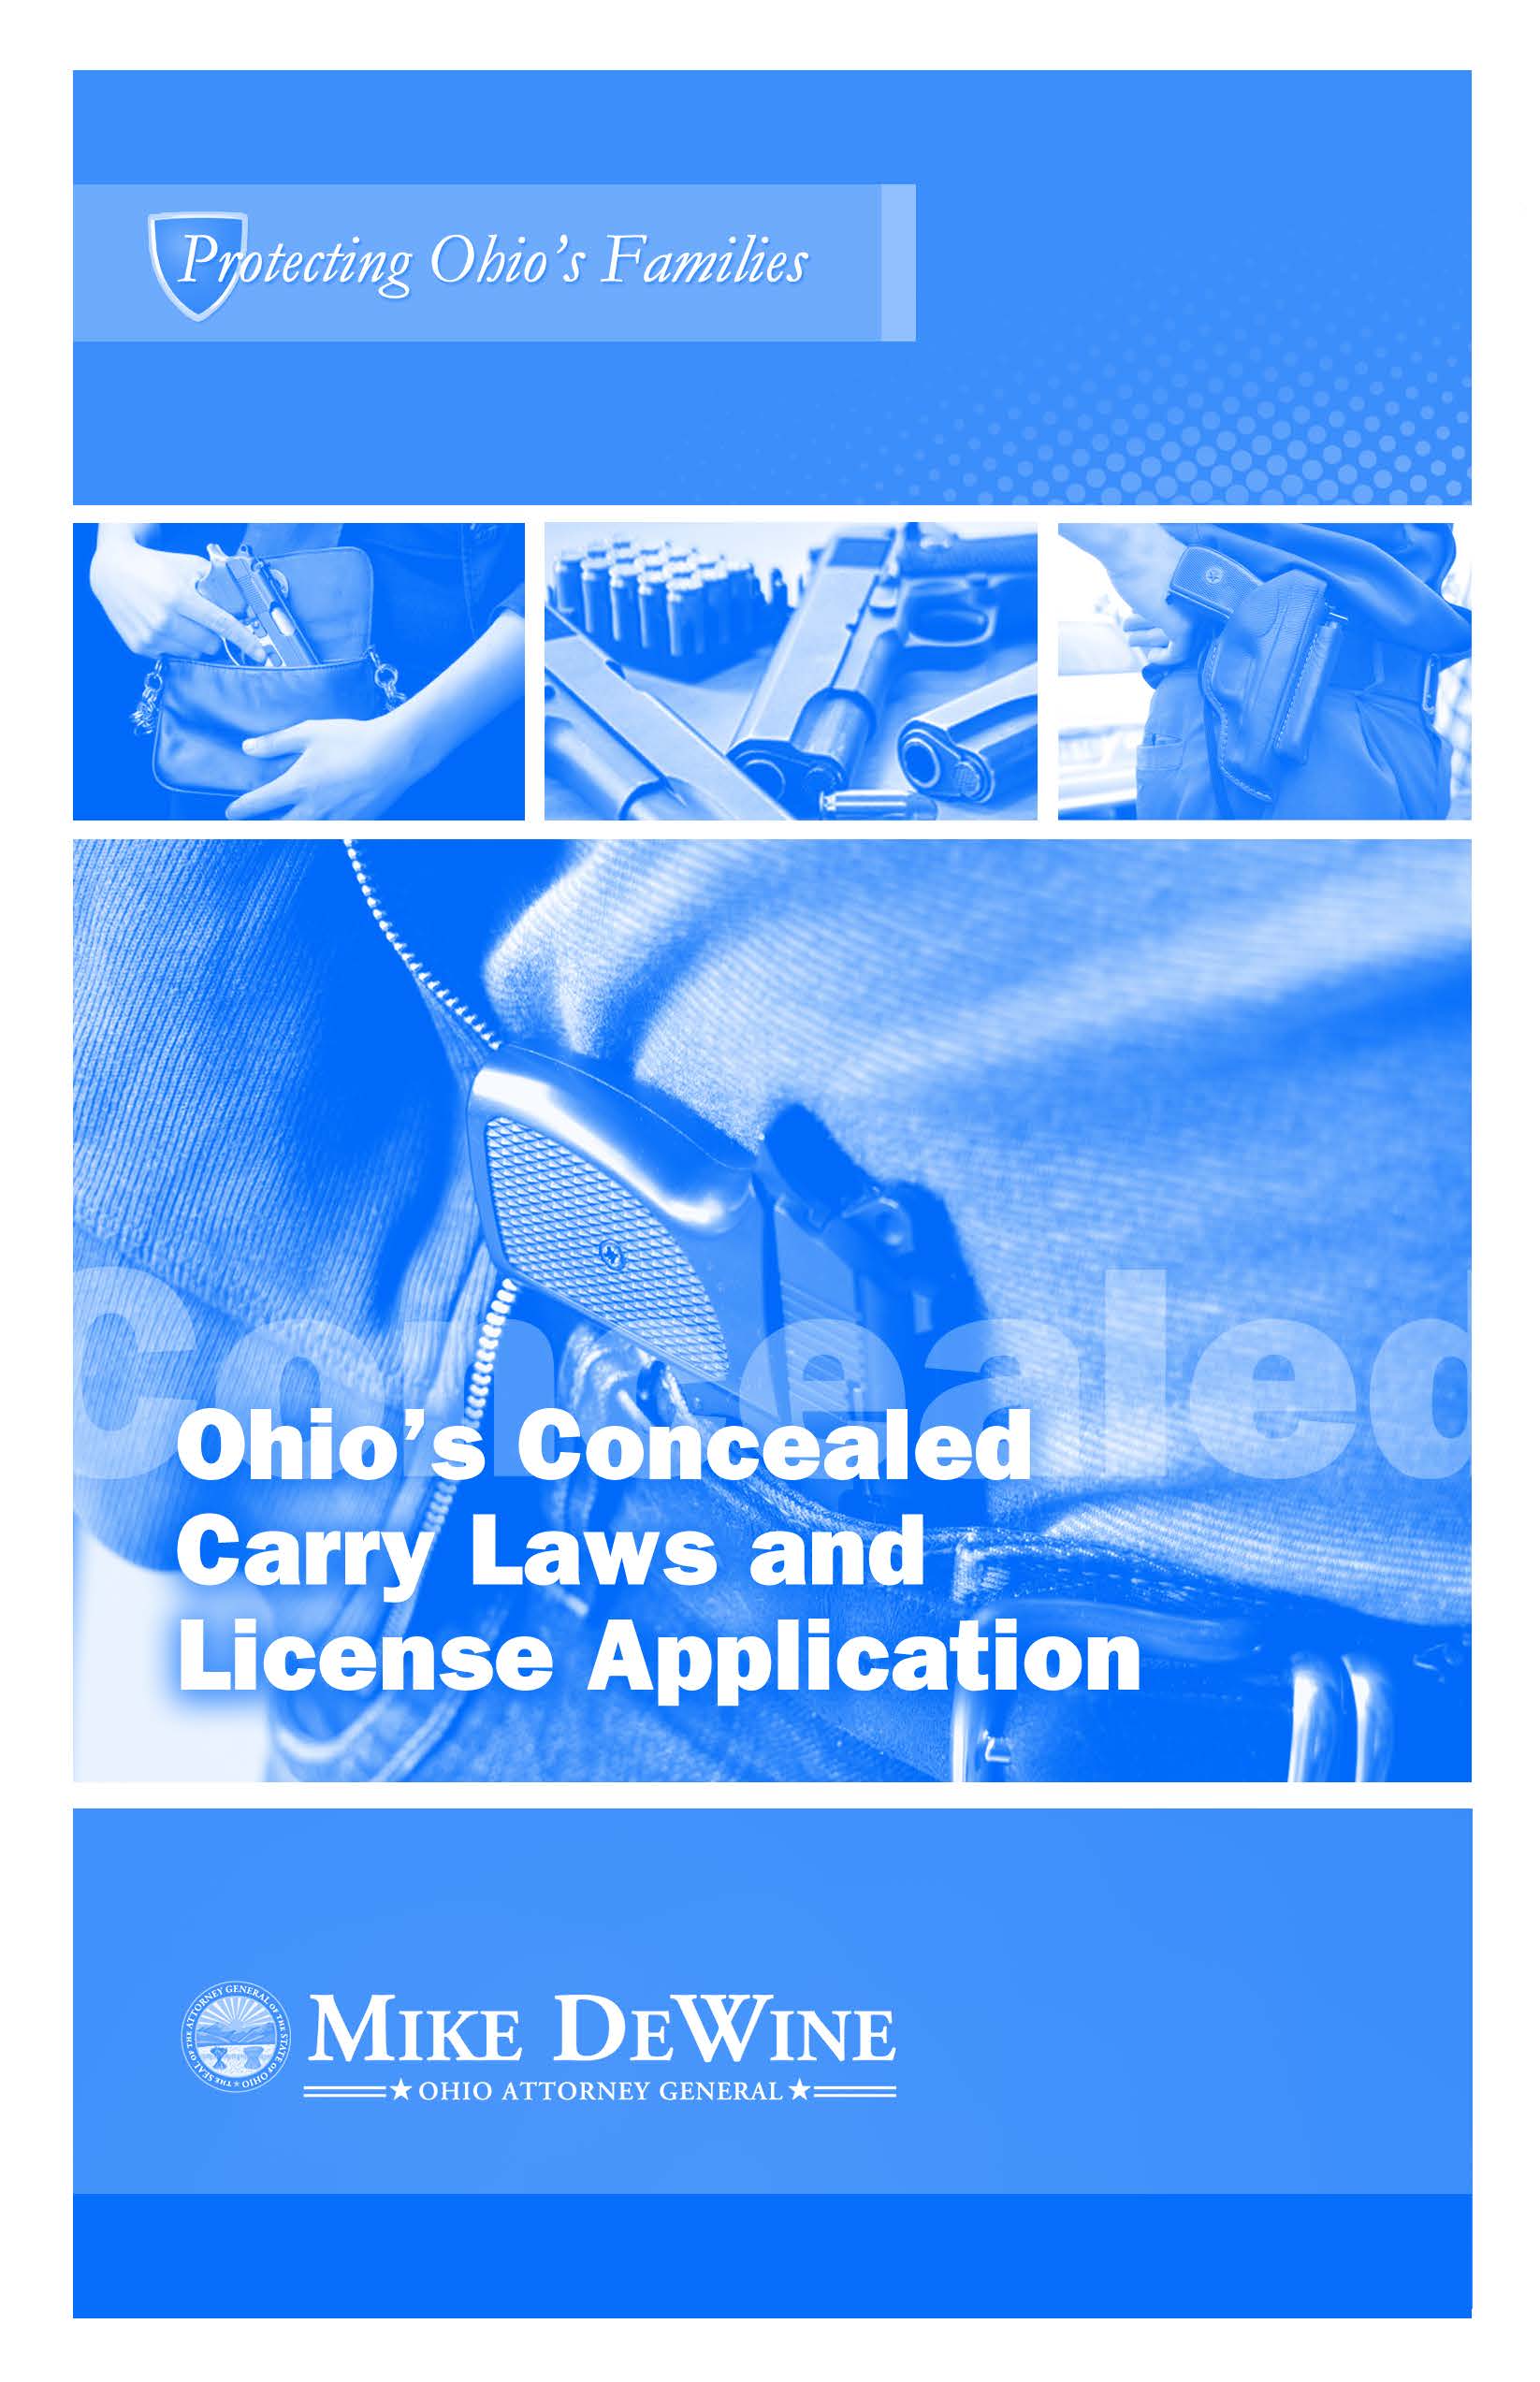 CCW Booklet Application WEB